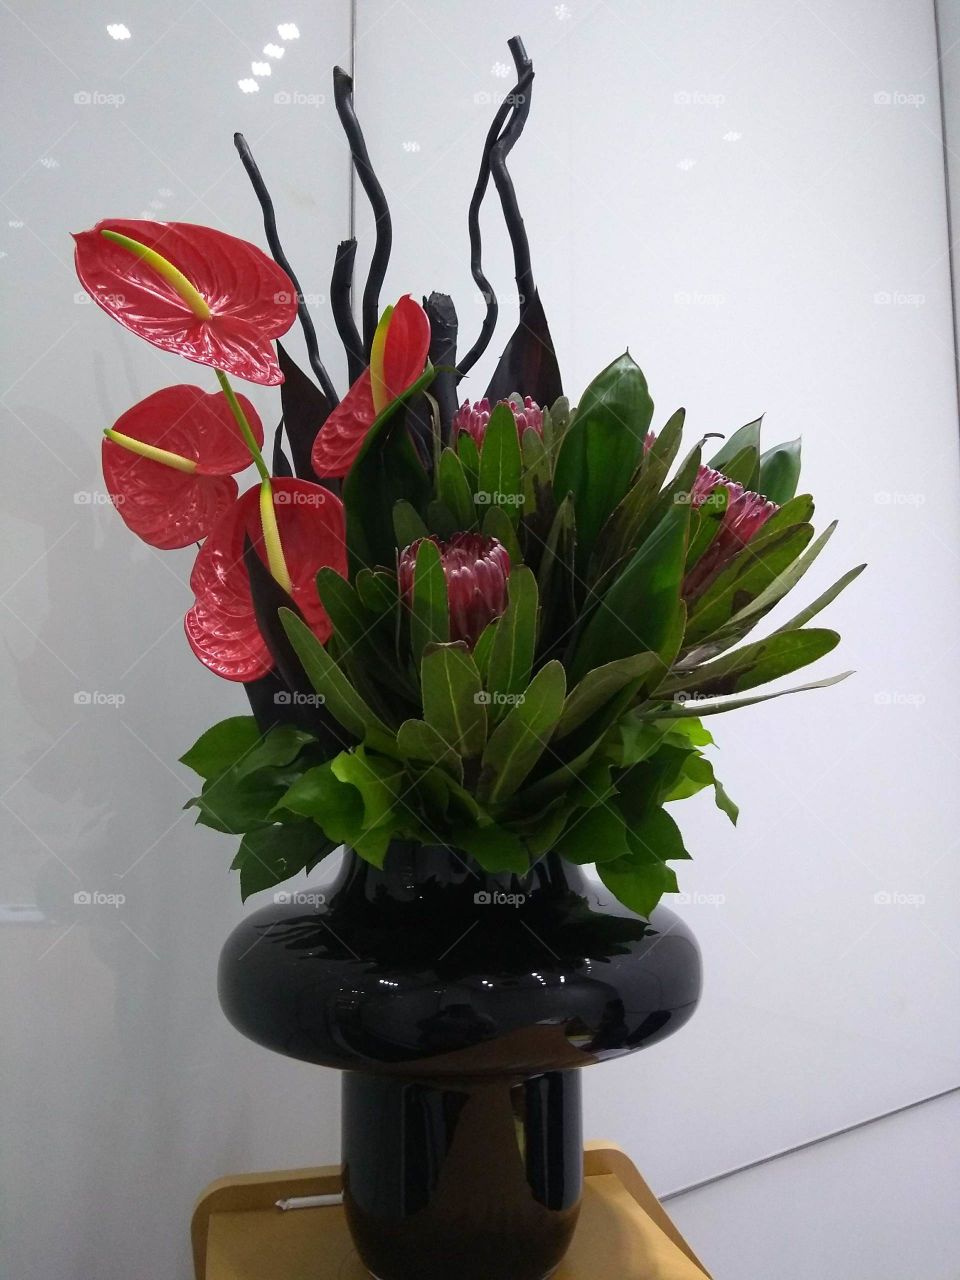 Bright Red Flowers in a Vase